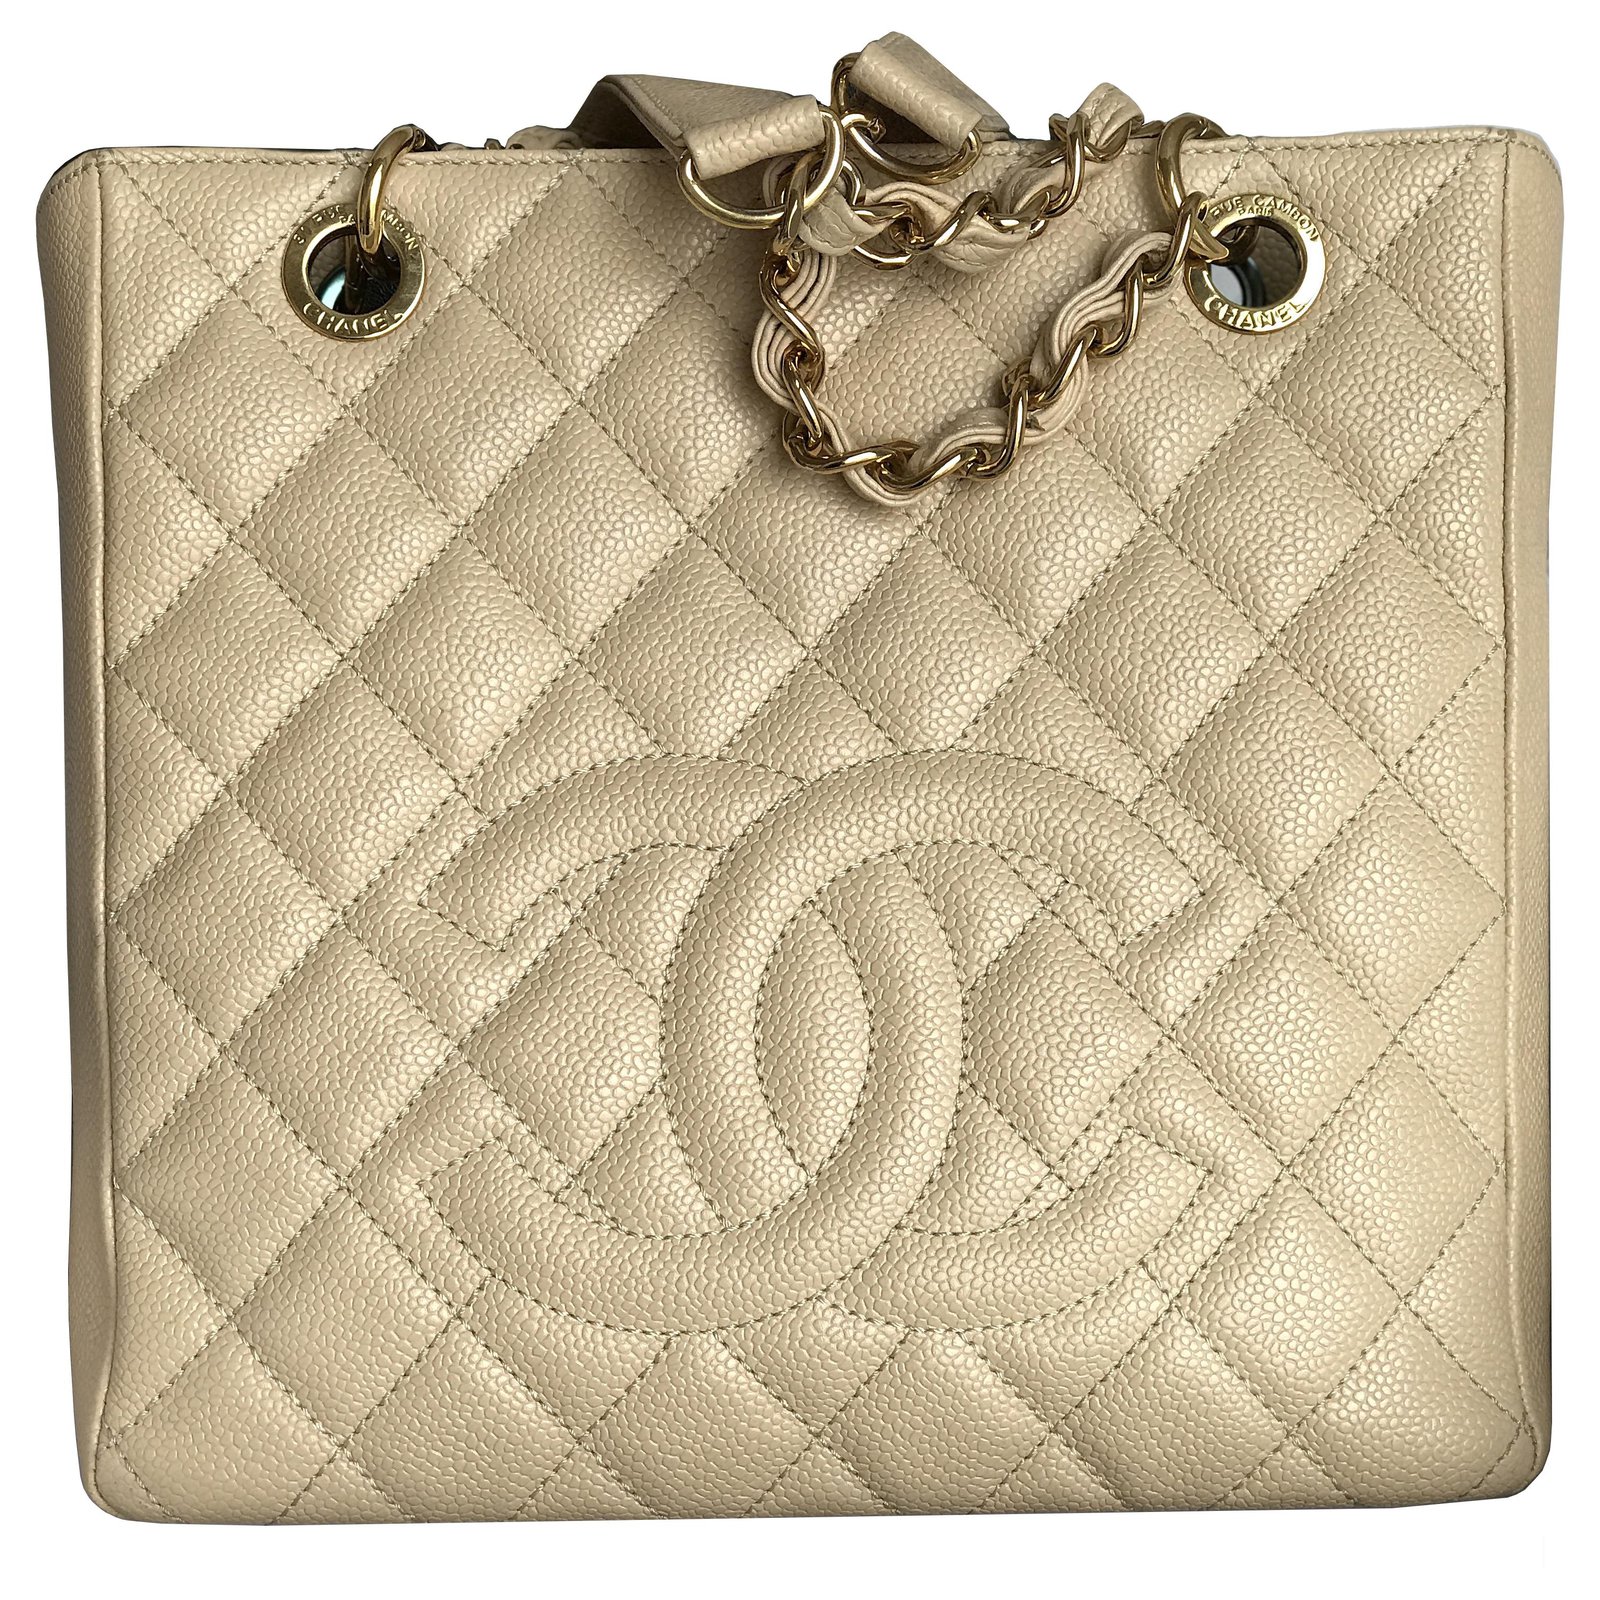 Chanel Shopping Tote PST Caviar Beige